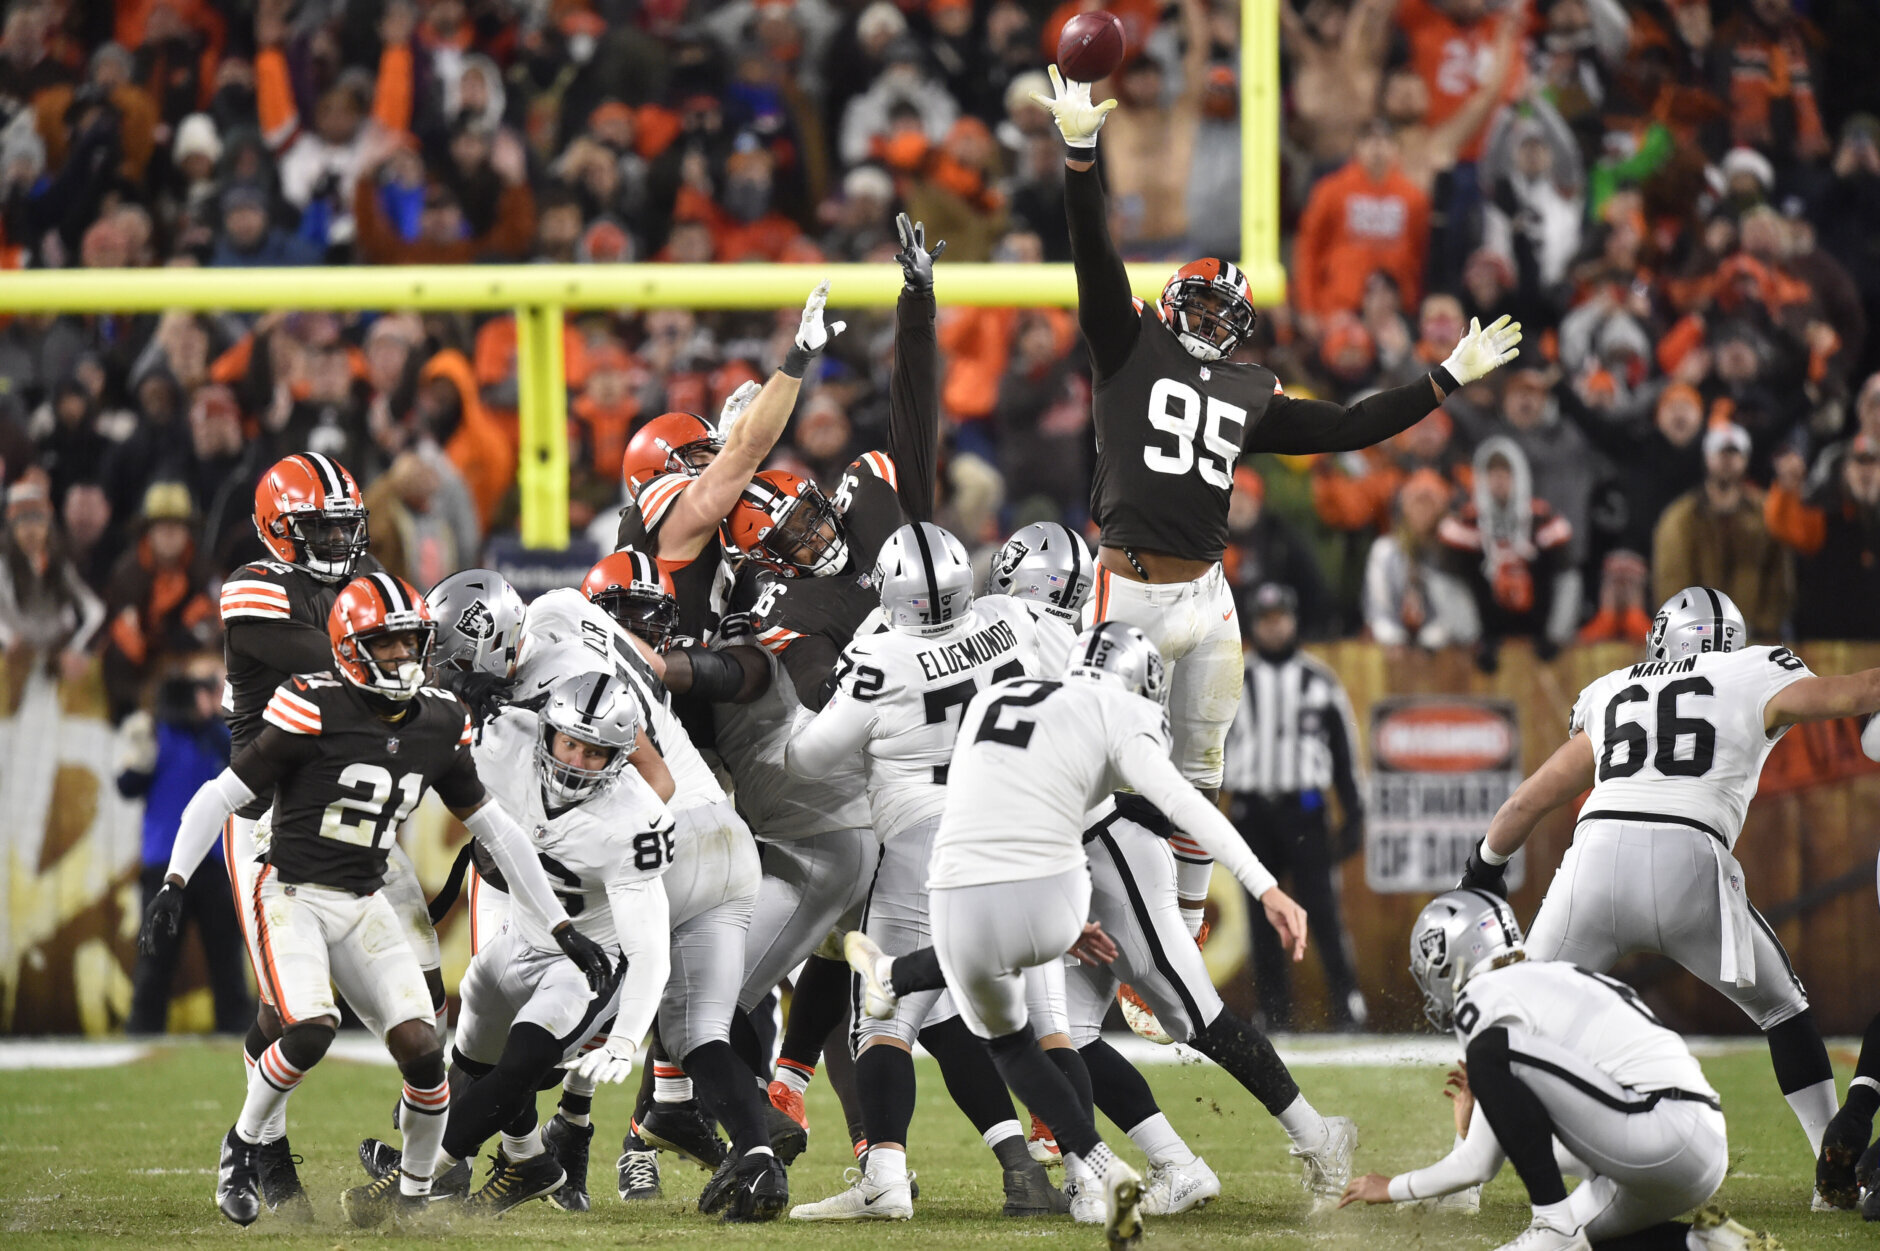 <p><em><strong>Raiders 16</strong></em><br />
<em><strong>Browns 14</strong></em></p>
<p>I know Cleveland has been decimated by COVID but things seemed to be <a href="https://profootballtalk.nbcsports.com/2021/12/13/what-are-the-internal-things-that-baker-mayfield-referenced/" target="_blank" rel="noopener">coming apart at the seams</a> even before that. The Browns missing the playoffs now feels inevitable.</p>
